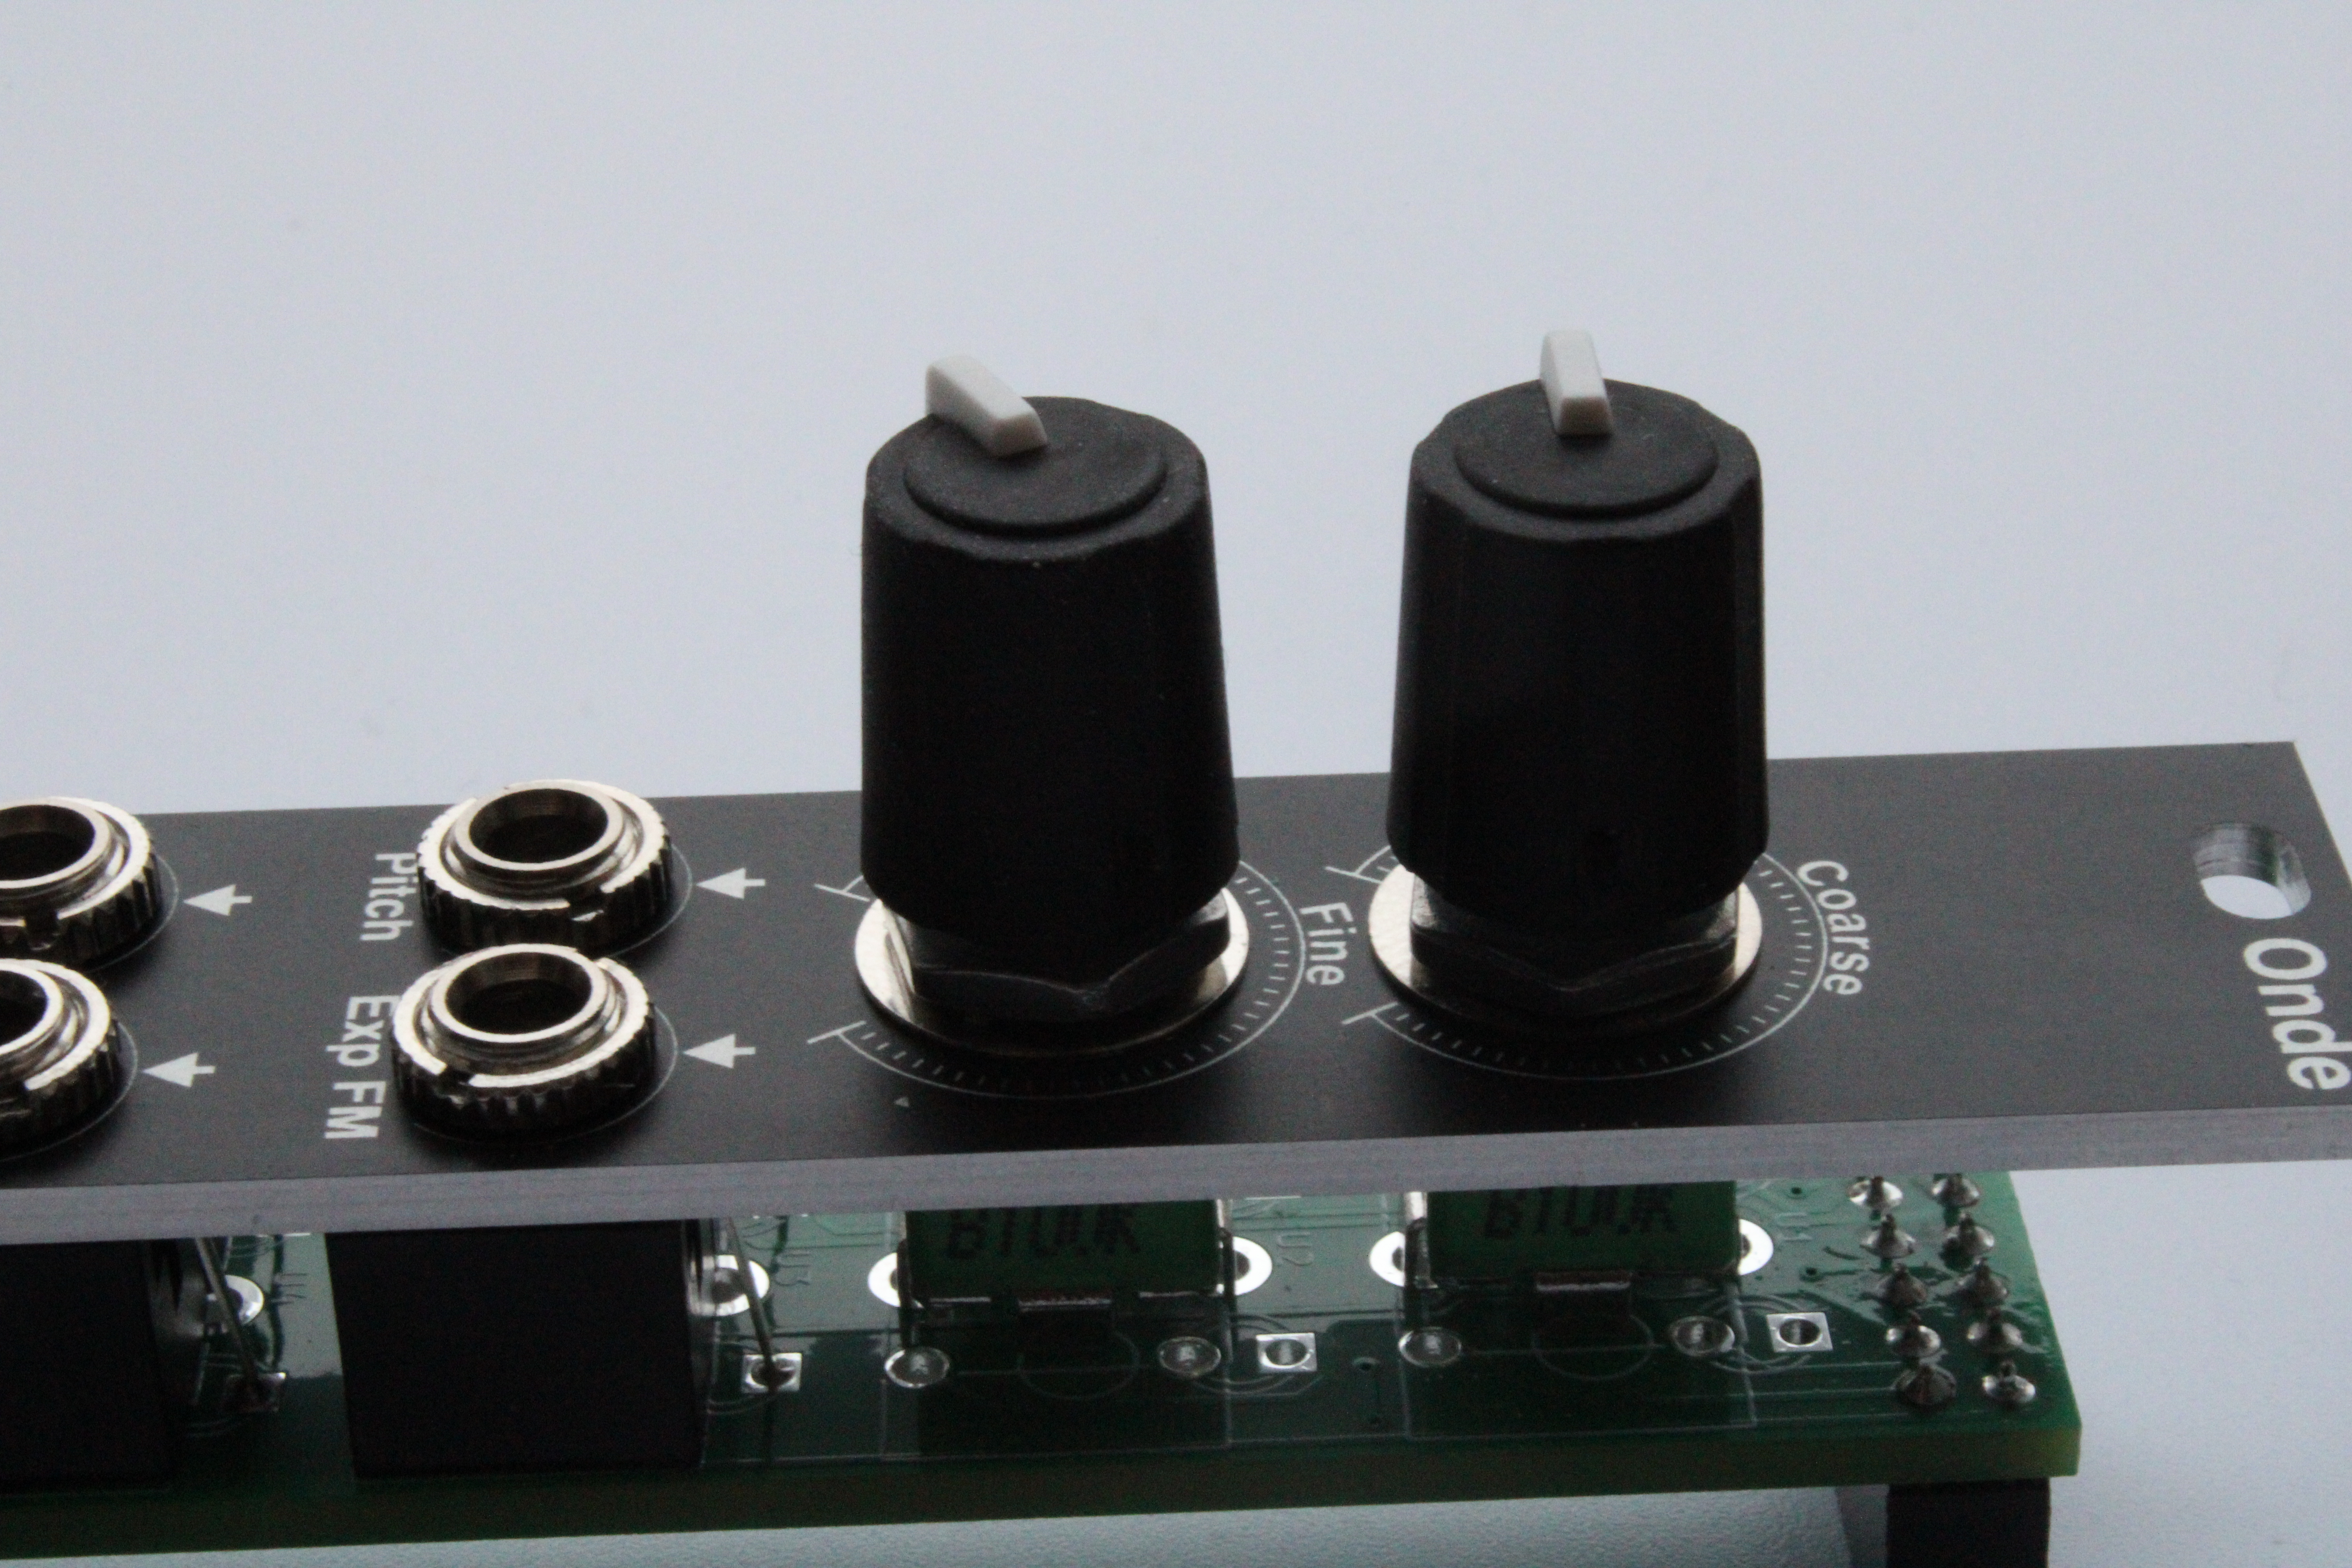 image from Introducing MRG Onde: A compact 4HP Oscillator